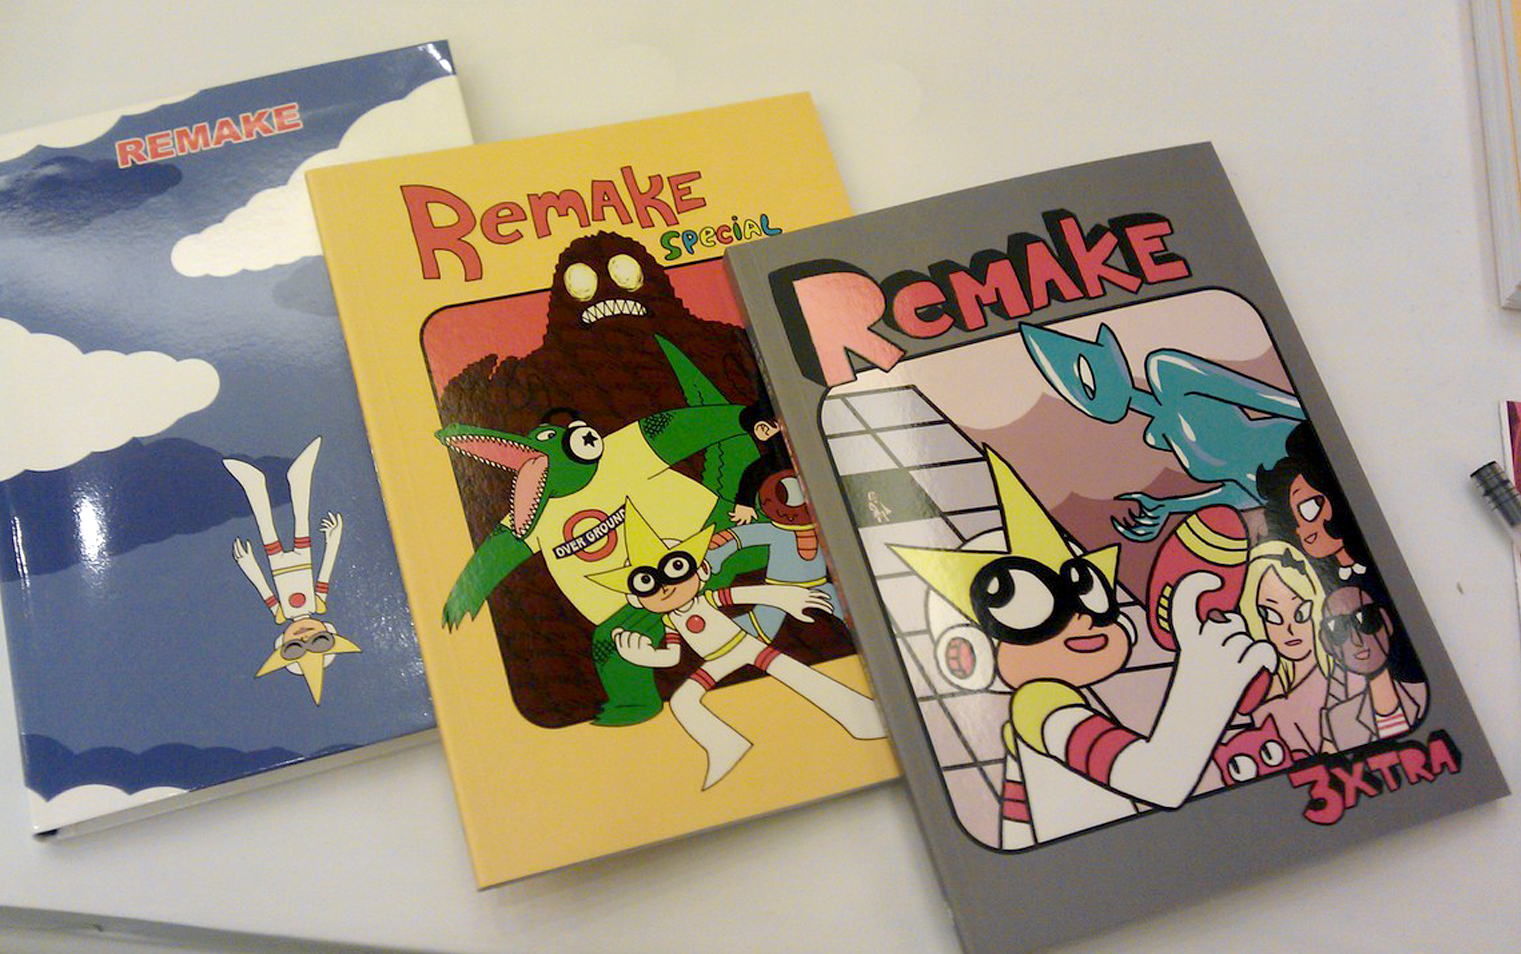 Covers of Remake, comic by Lamar Abrams, storyboard artist for Steven Universe. Credit: AdHouse